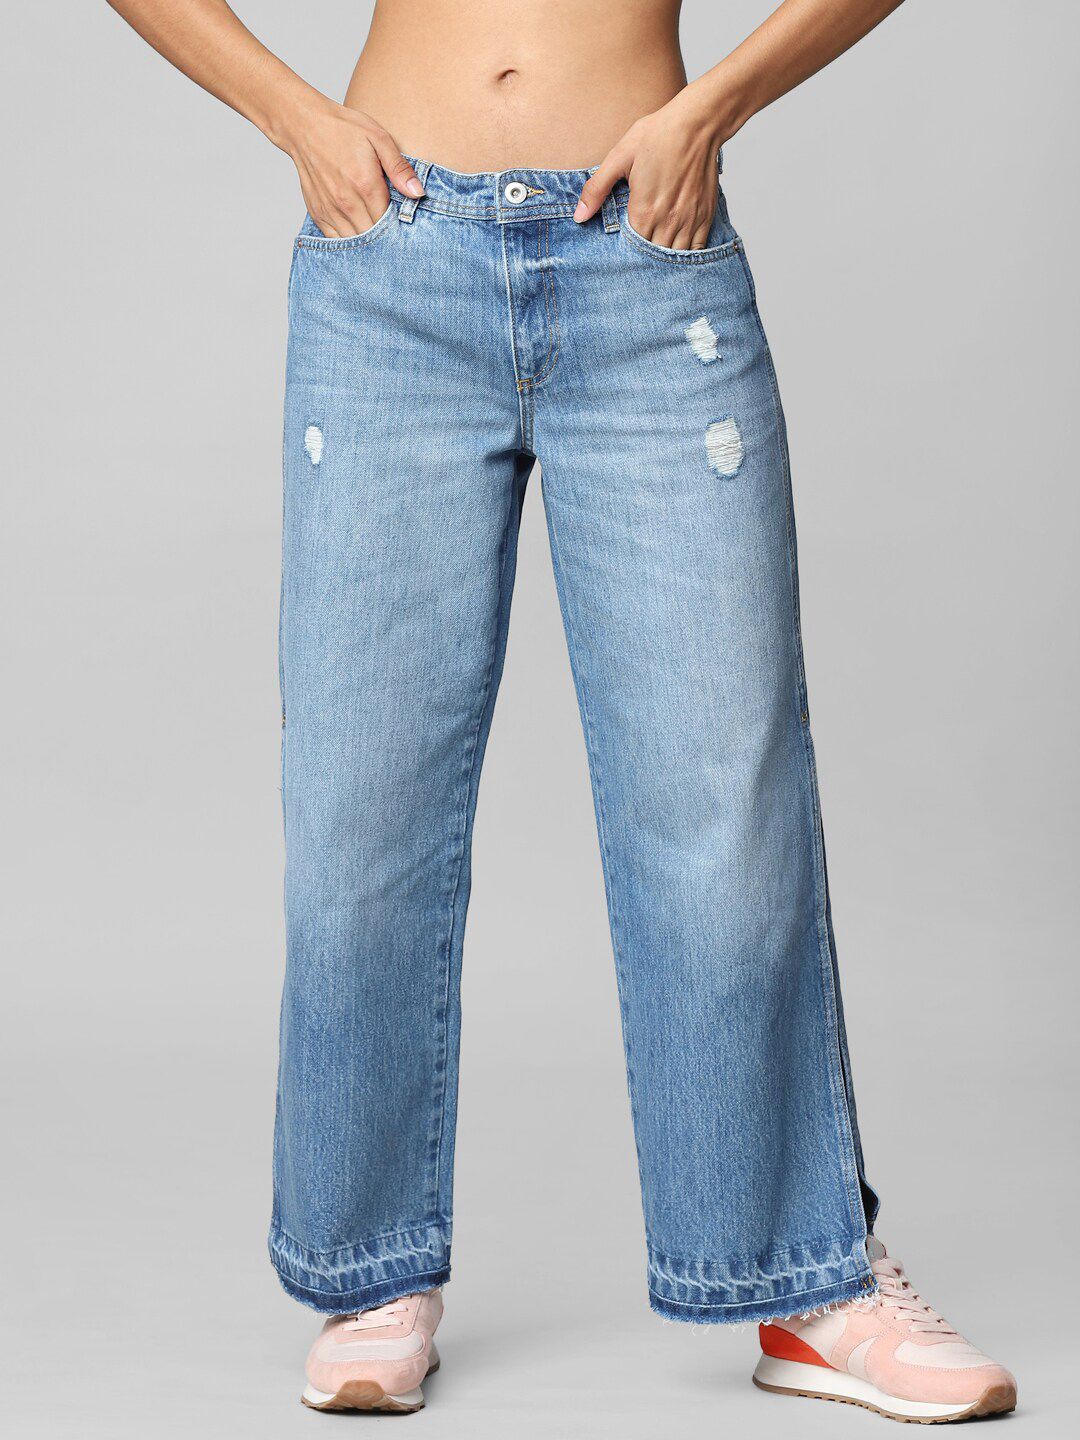 ONLY Women Blue Flared Mildly Distressed Light Fade Jeans Price in India